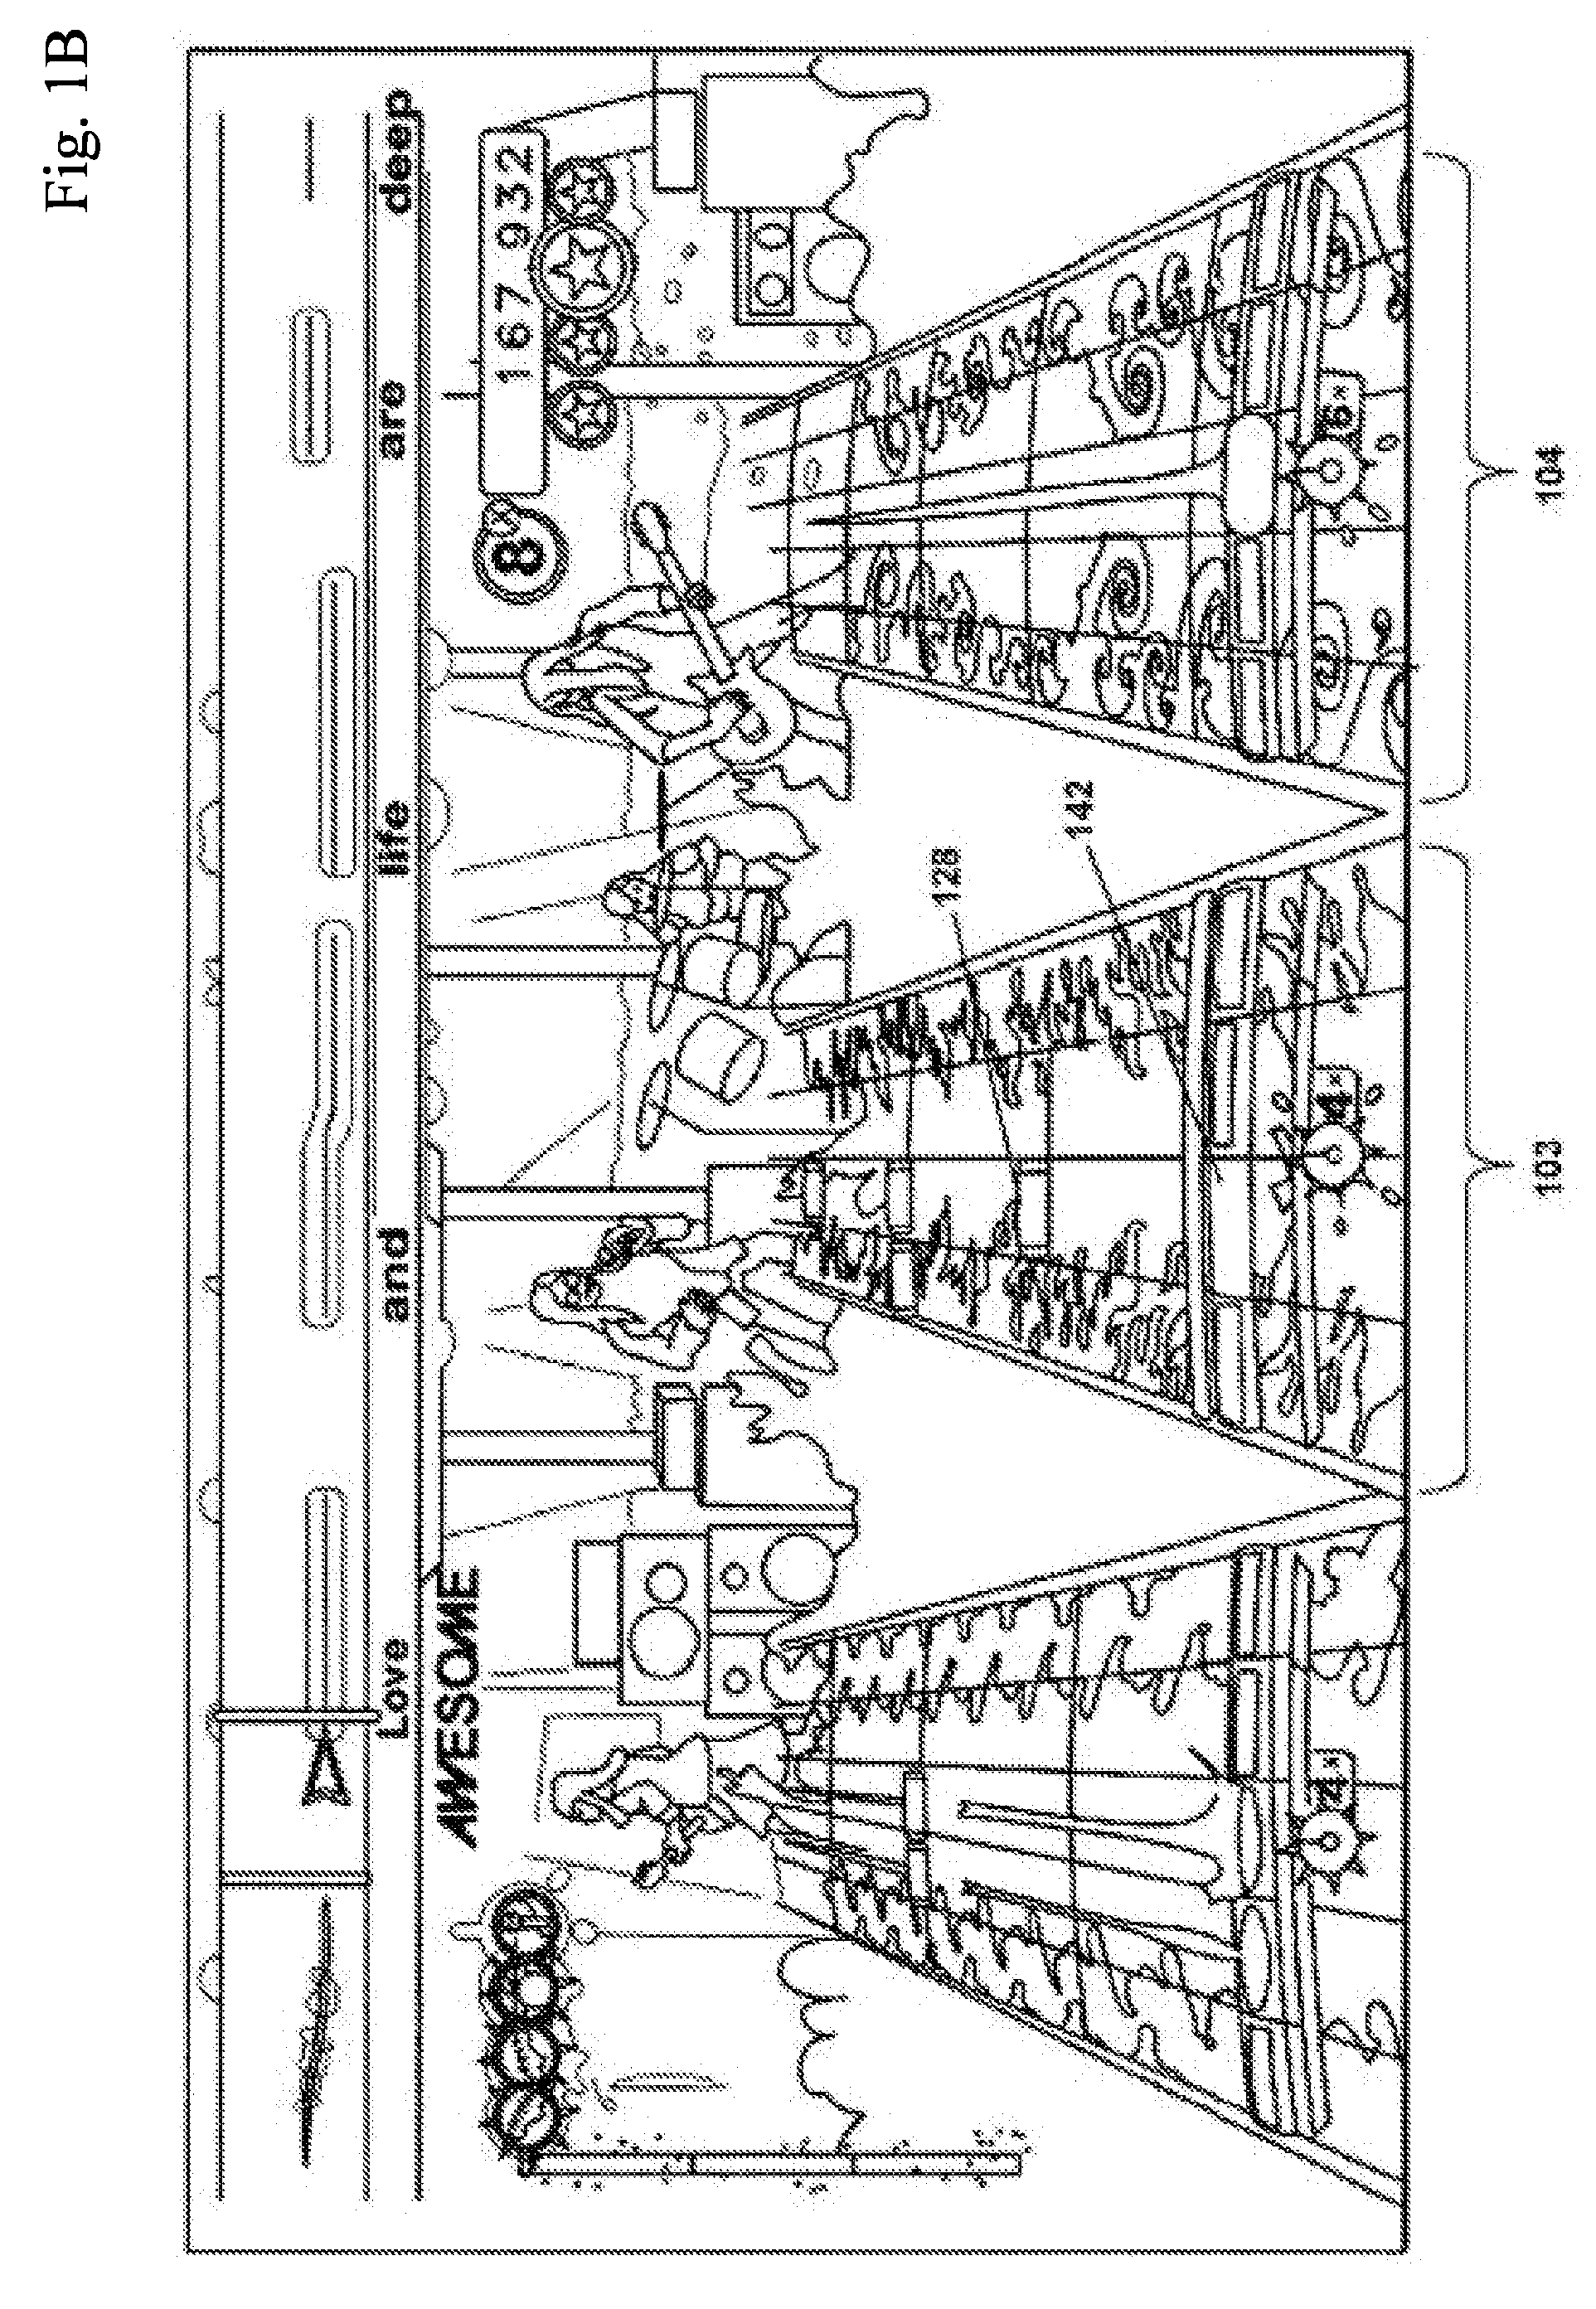 Systems and methods for asynchronous band interaction in a rhythm action game